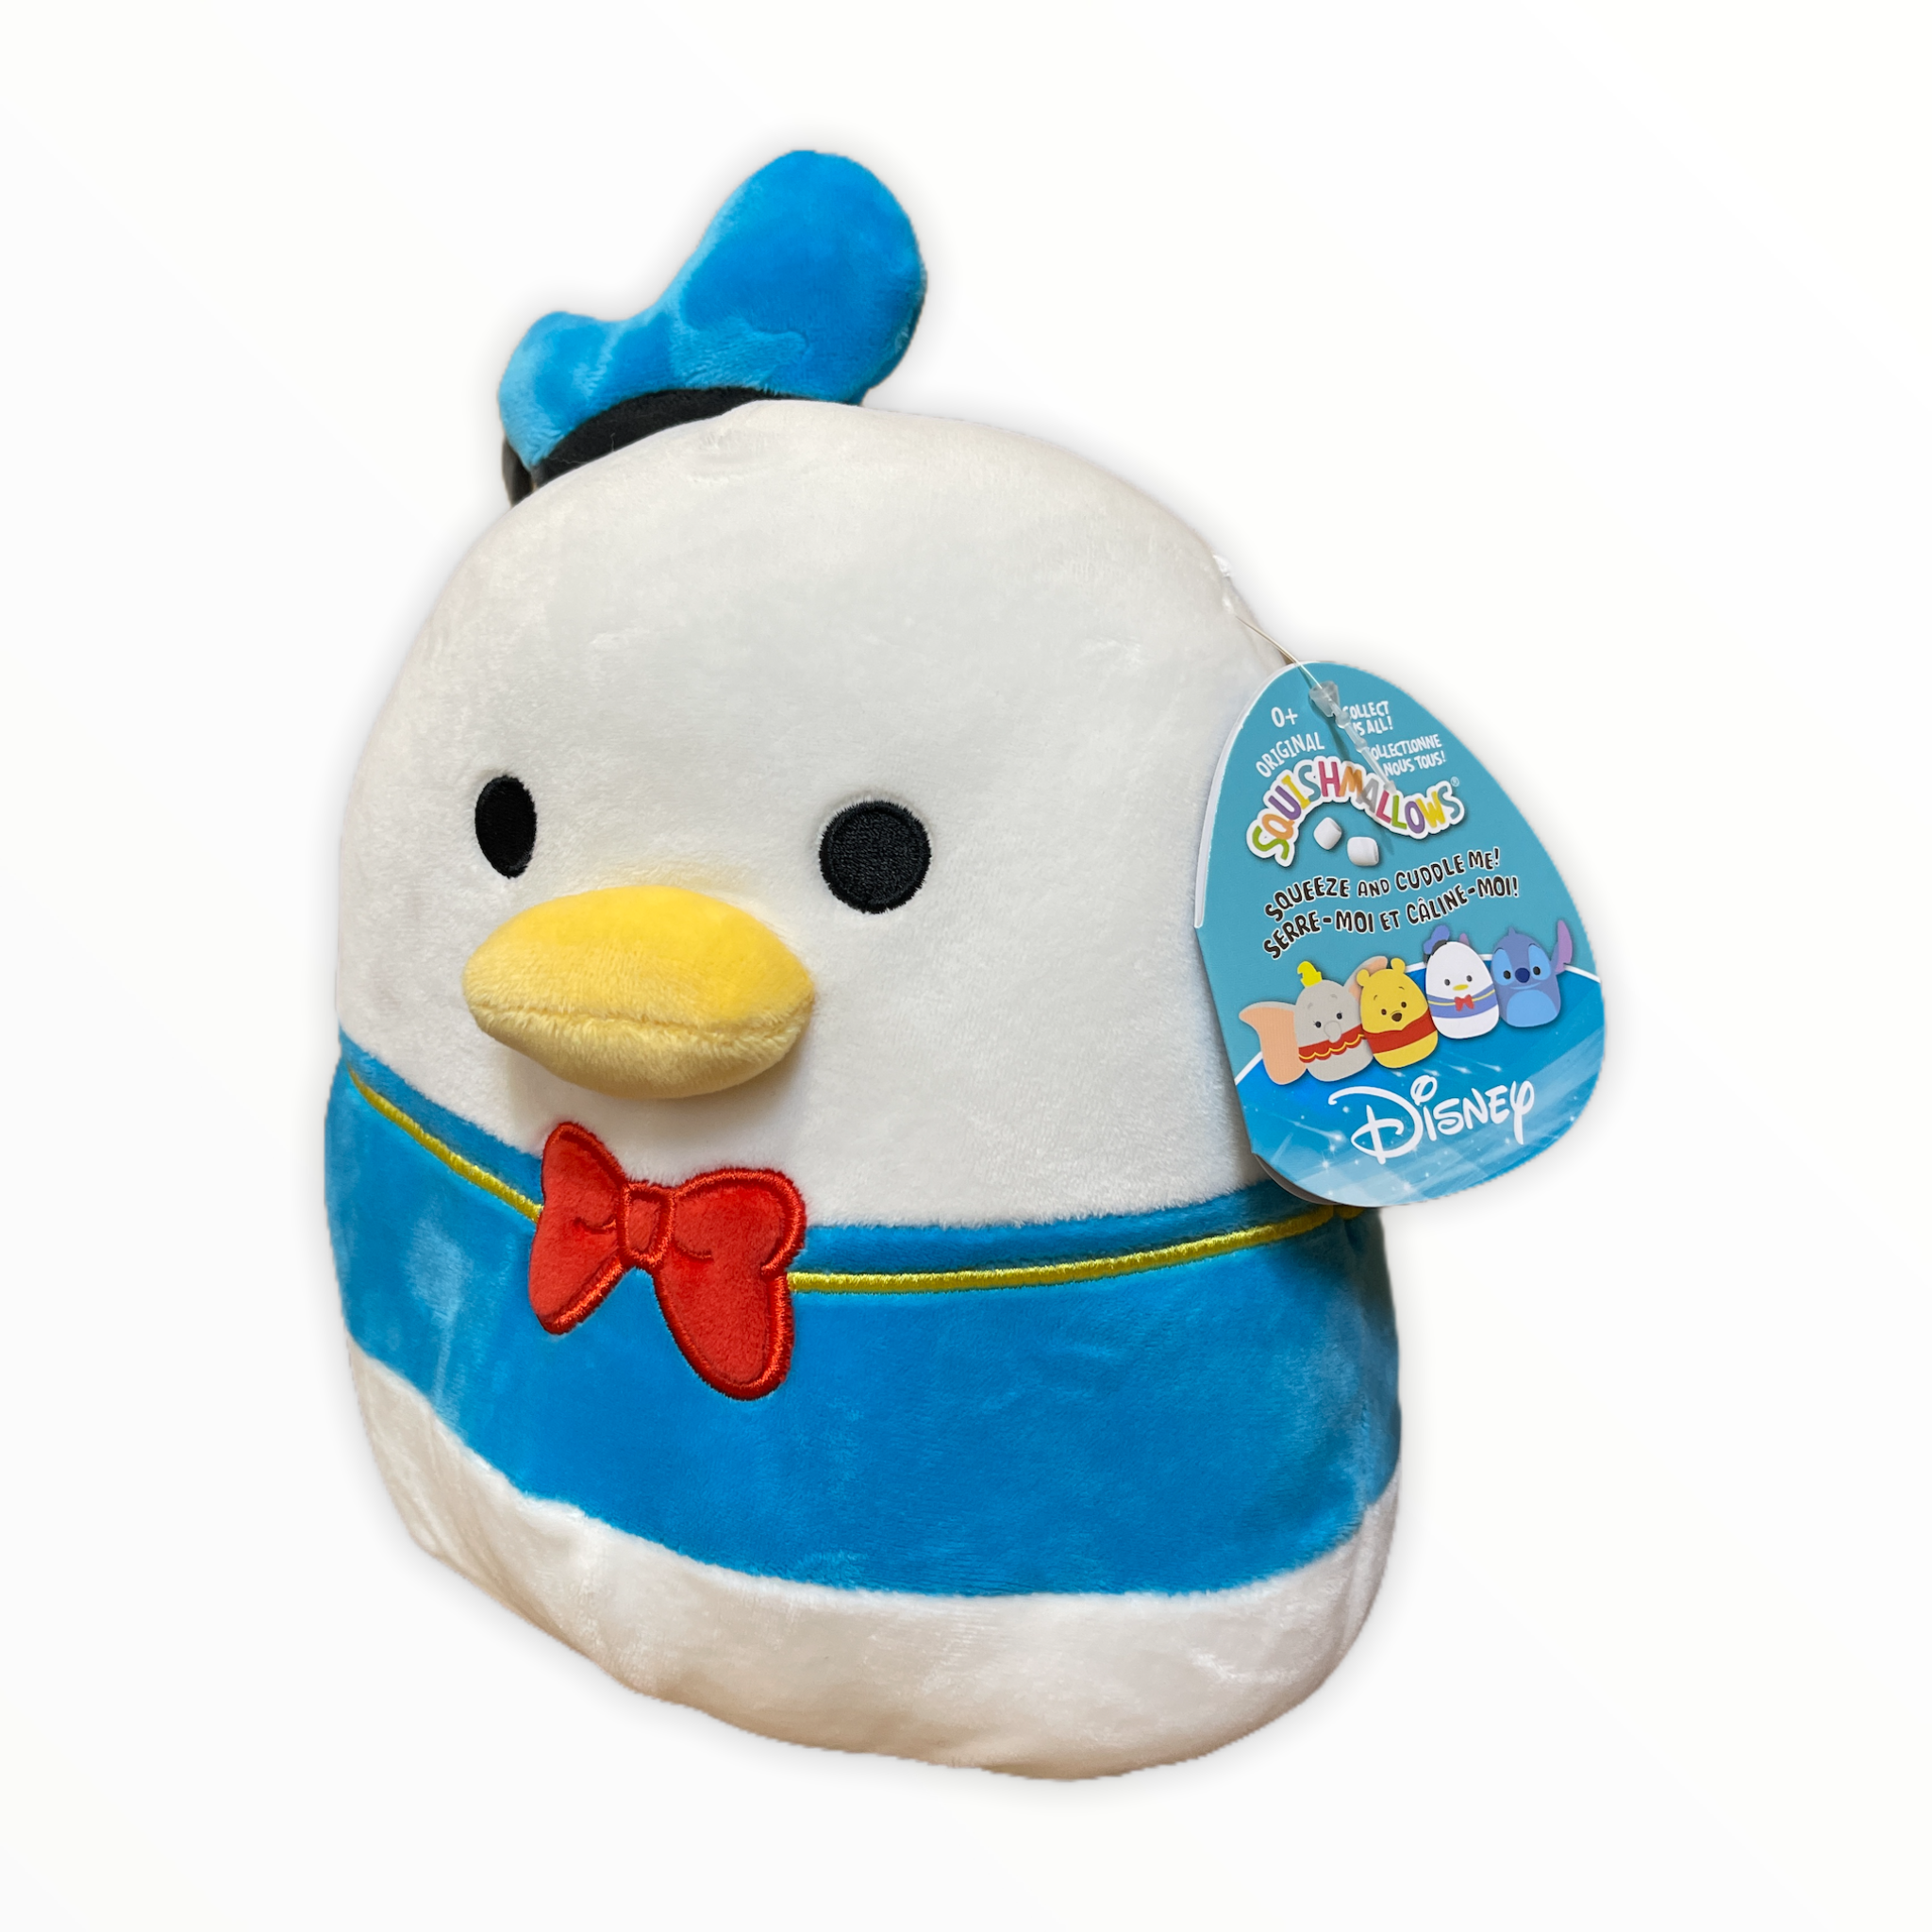 Squishmallows Official Kellytoy Disney Characters Squishy Soft Stuffed  Plush Toy Animal 5” inch (Donald Duck)